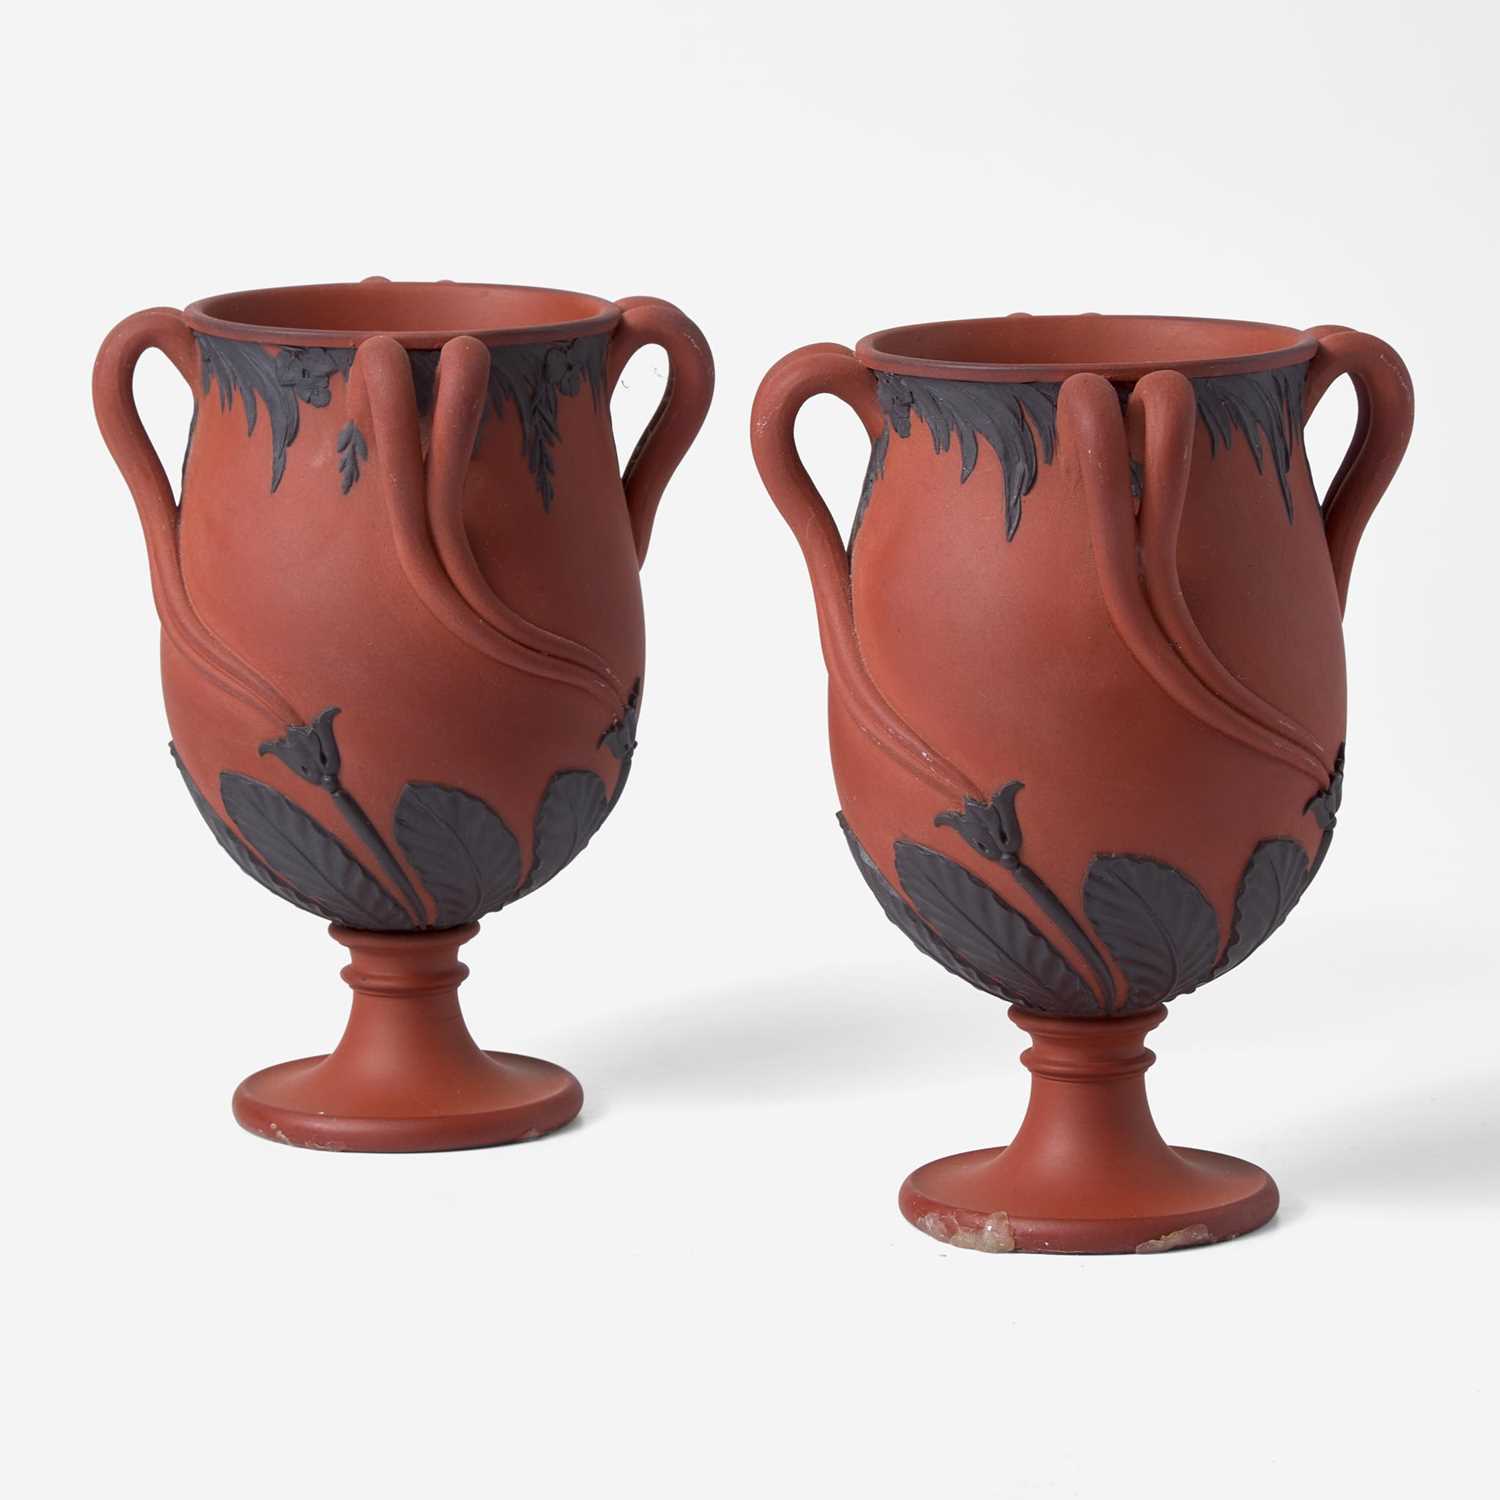 Lot 32 - A Pair of Wedgwood Black Basaltes-Decorated Rosso Antico "Tendril" Vases